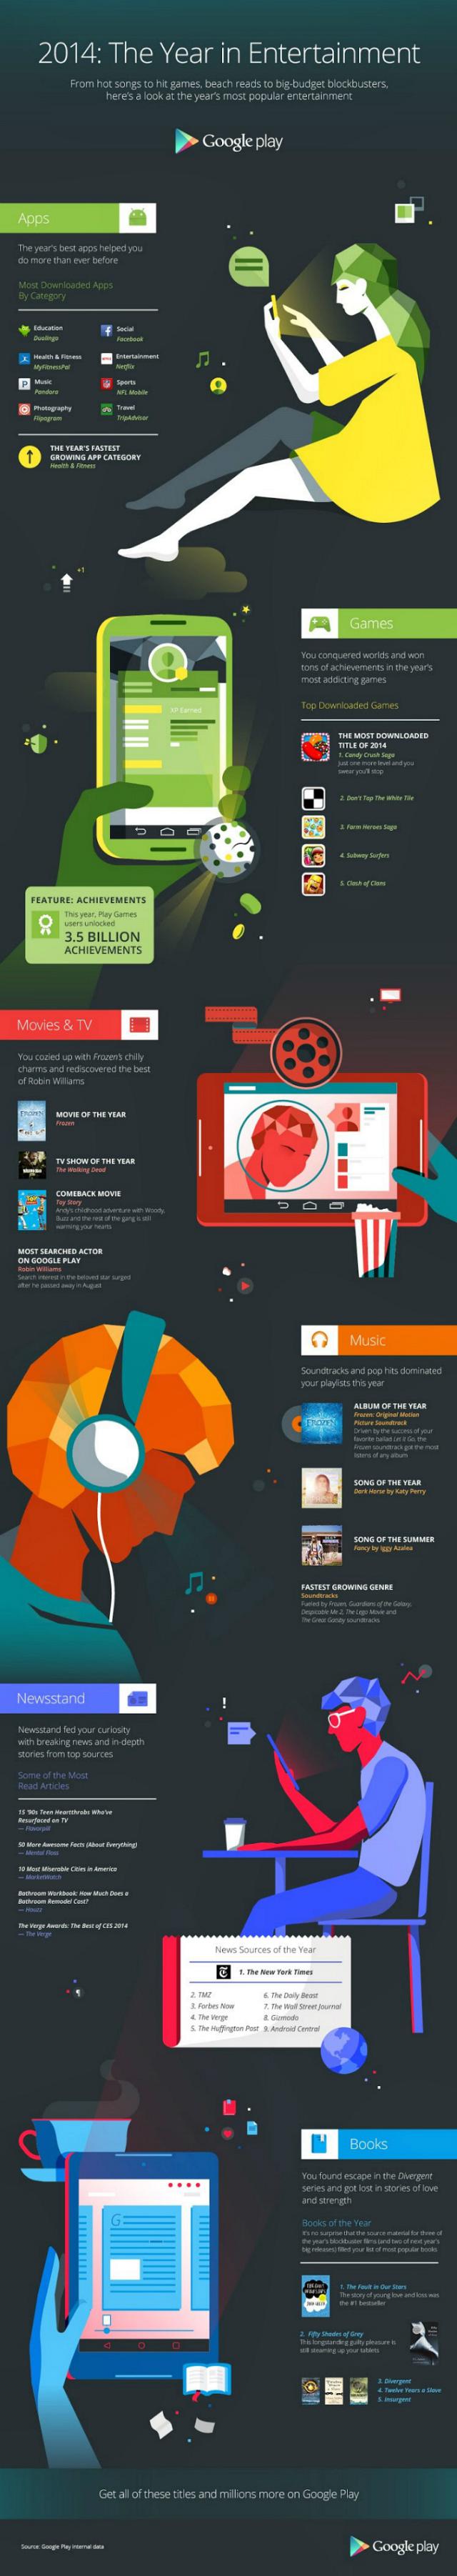 google-the-year-in-entertainment-infographic